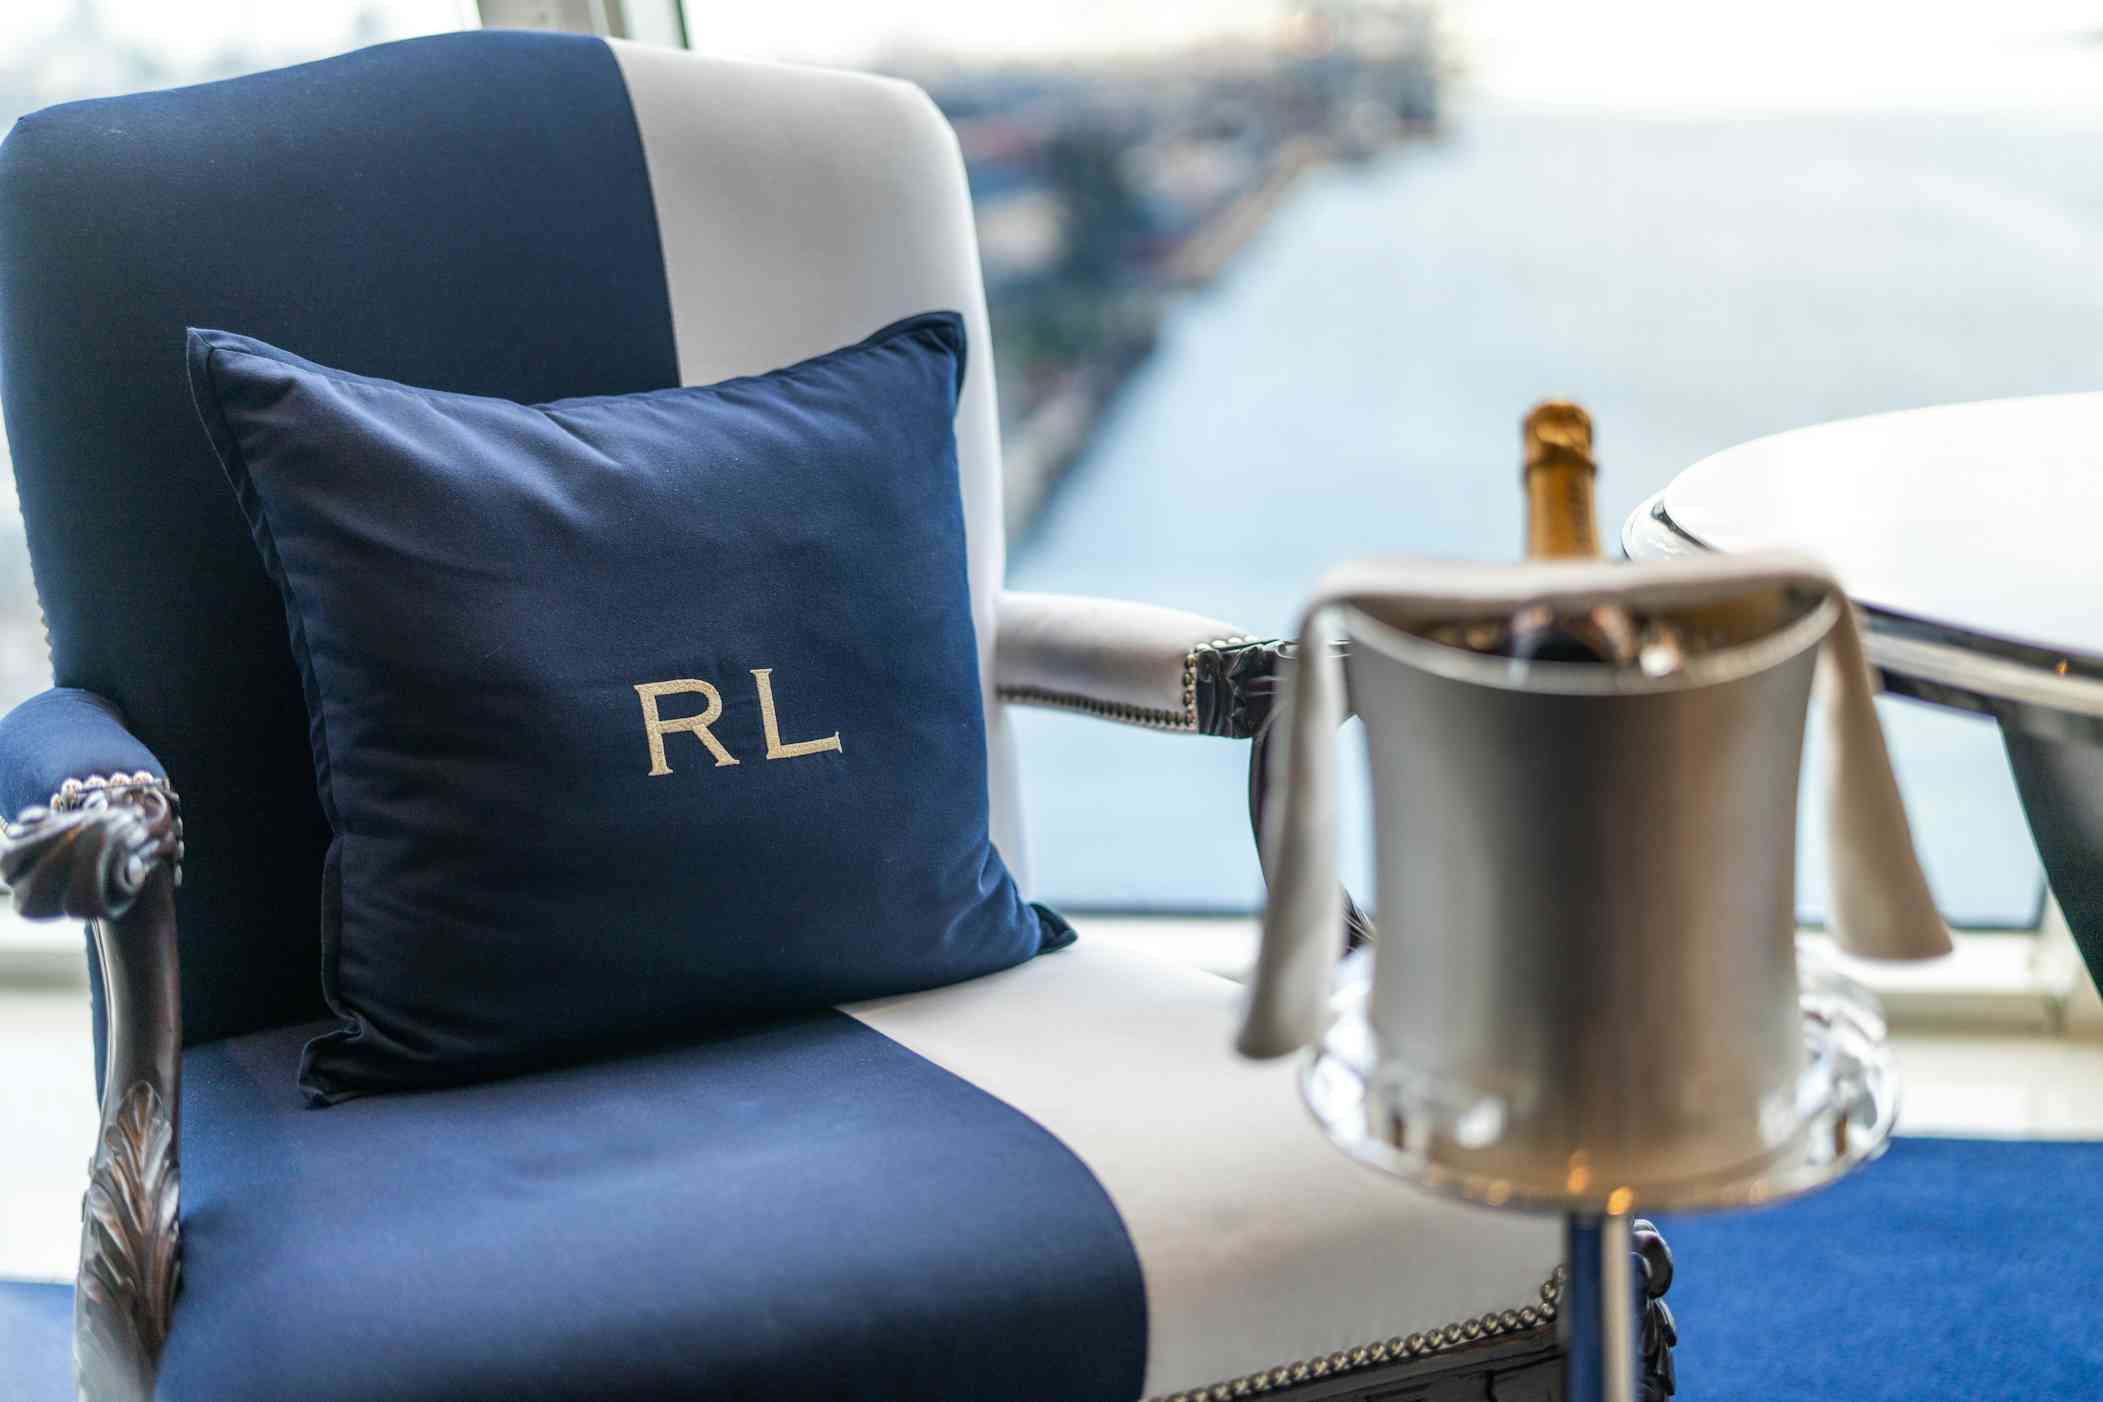 Oceania's New Ship to Be Styled With Ralph Lauren Home